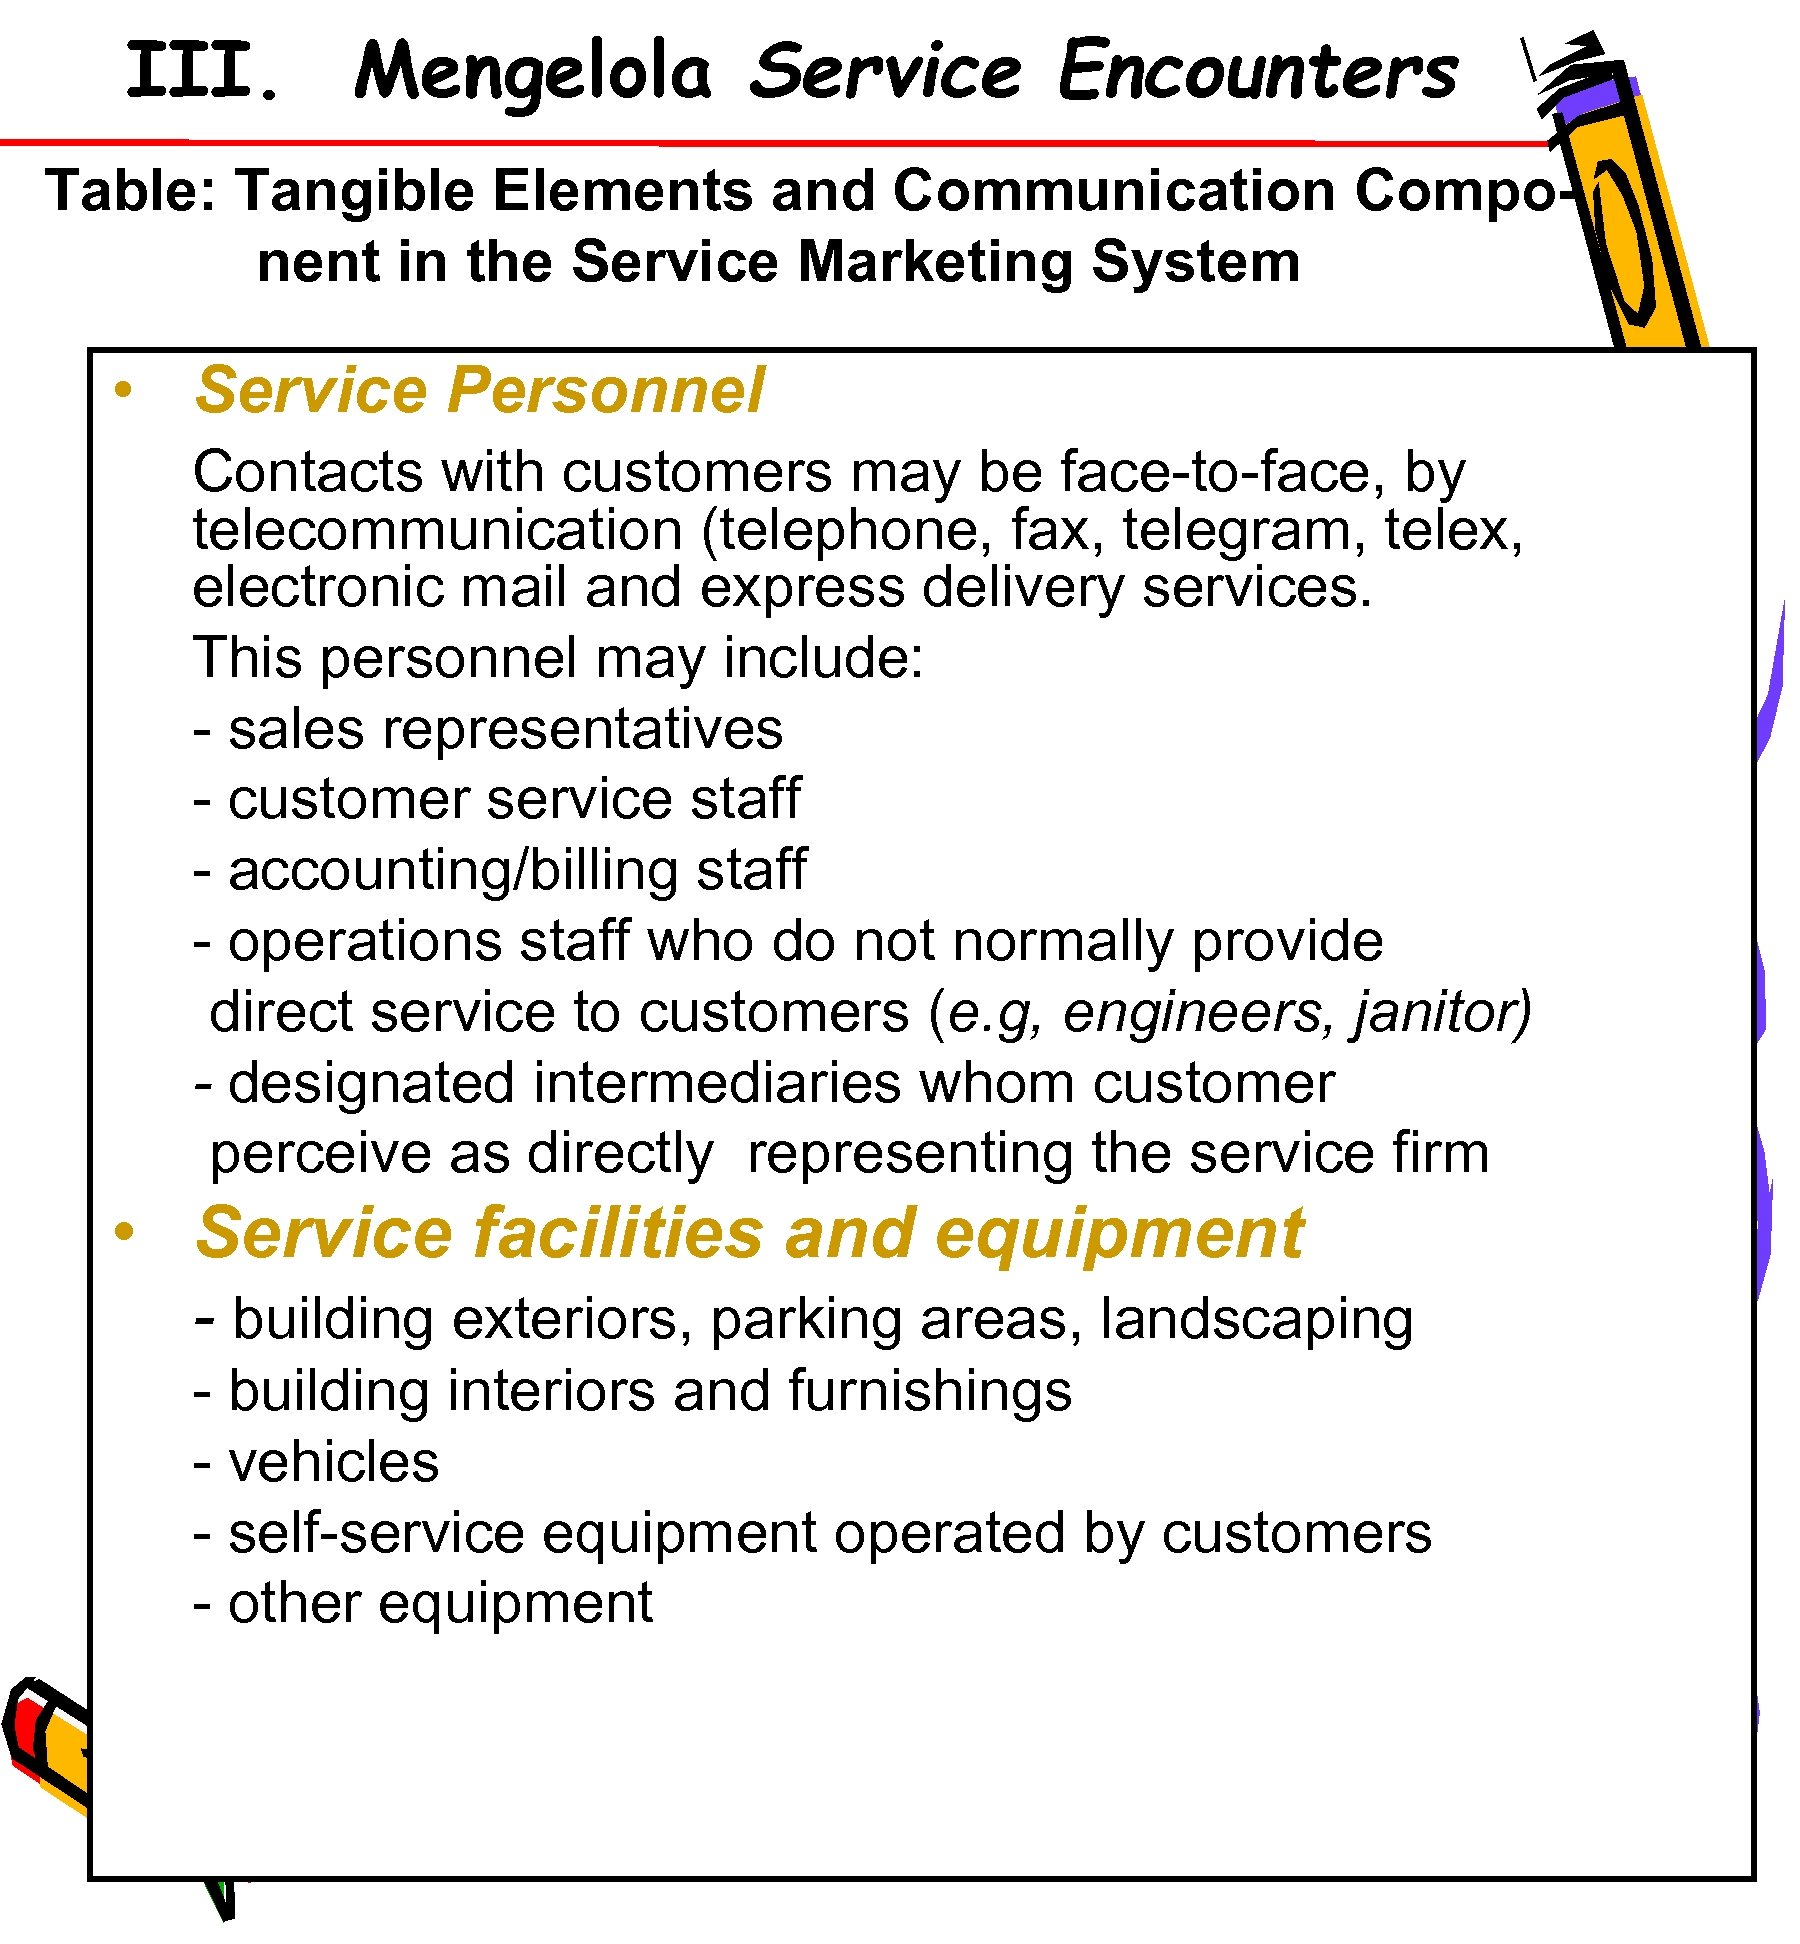 III. Mengelola Service Encounters Table: Tangible Elements and Communication Component in the Service Marketing